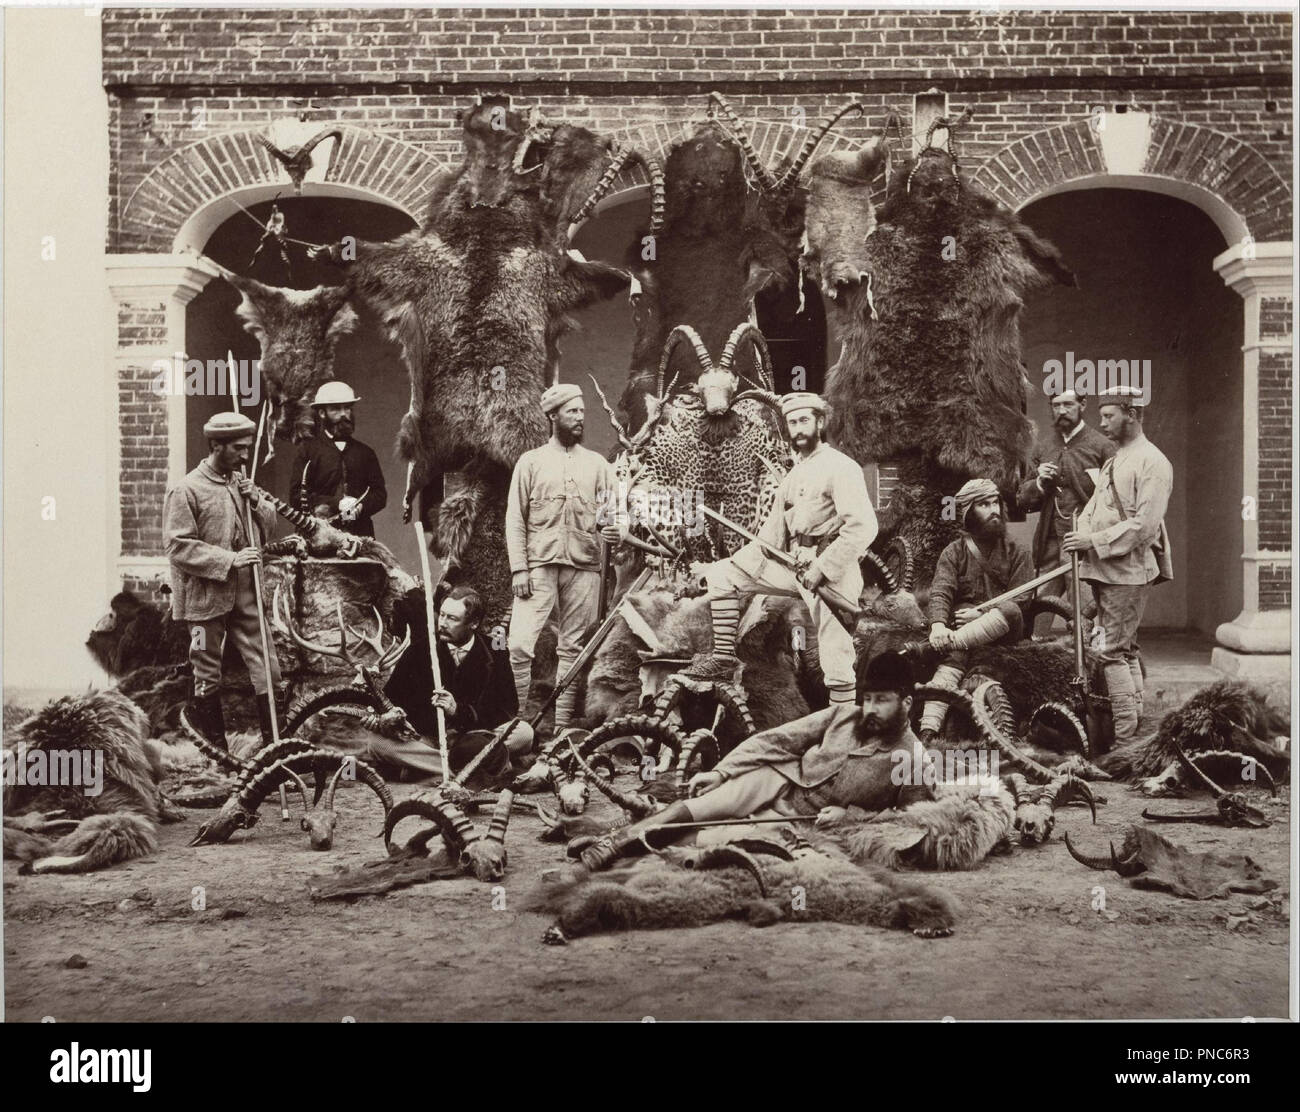 Hunters and Trophies, India. Date/Period: 1860/1869. Albumen print. Width: 28.4 cm. Height: 22.7 cm (sheet). Author: Samuel Bourne. Stock Photo